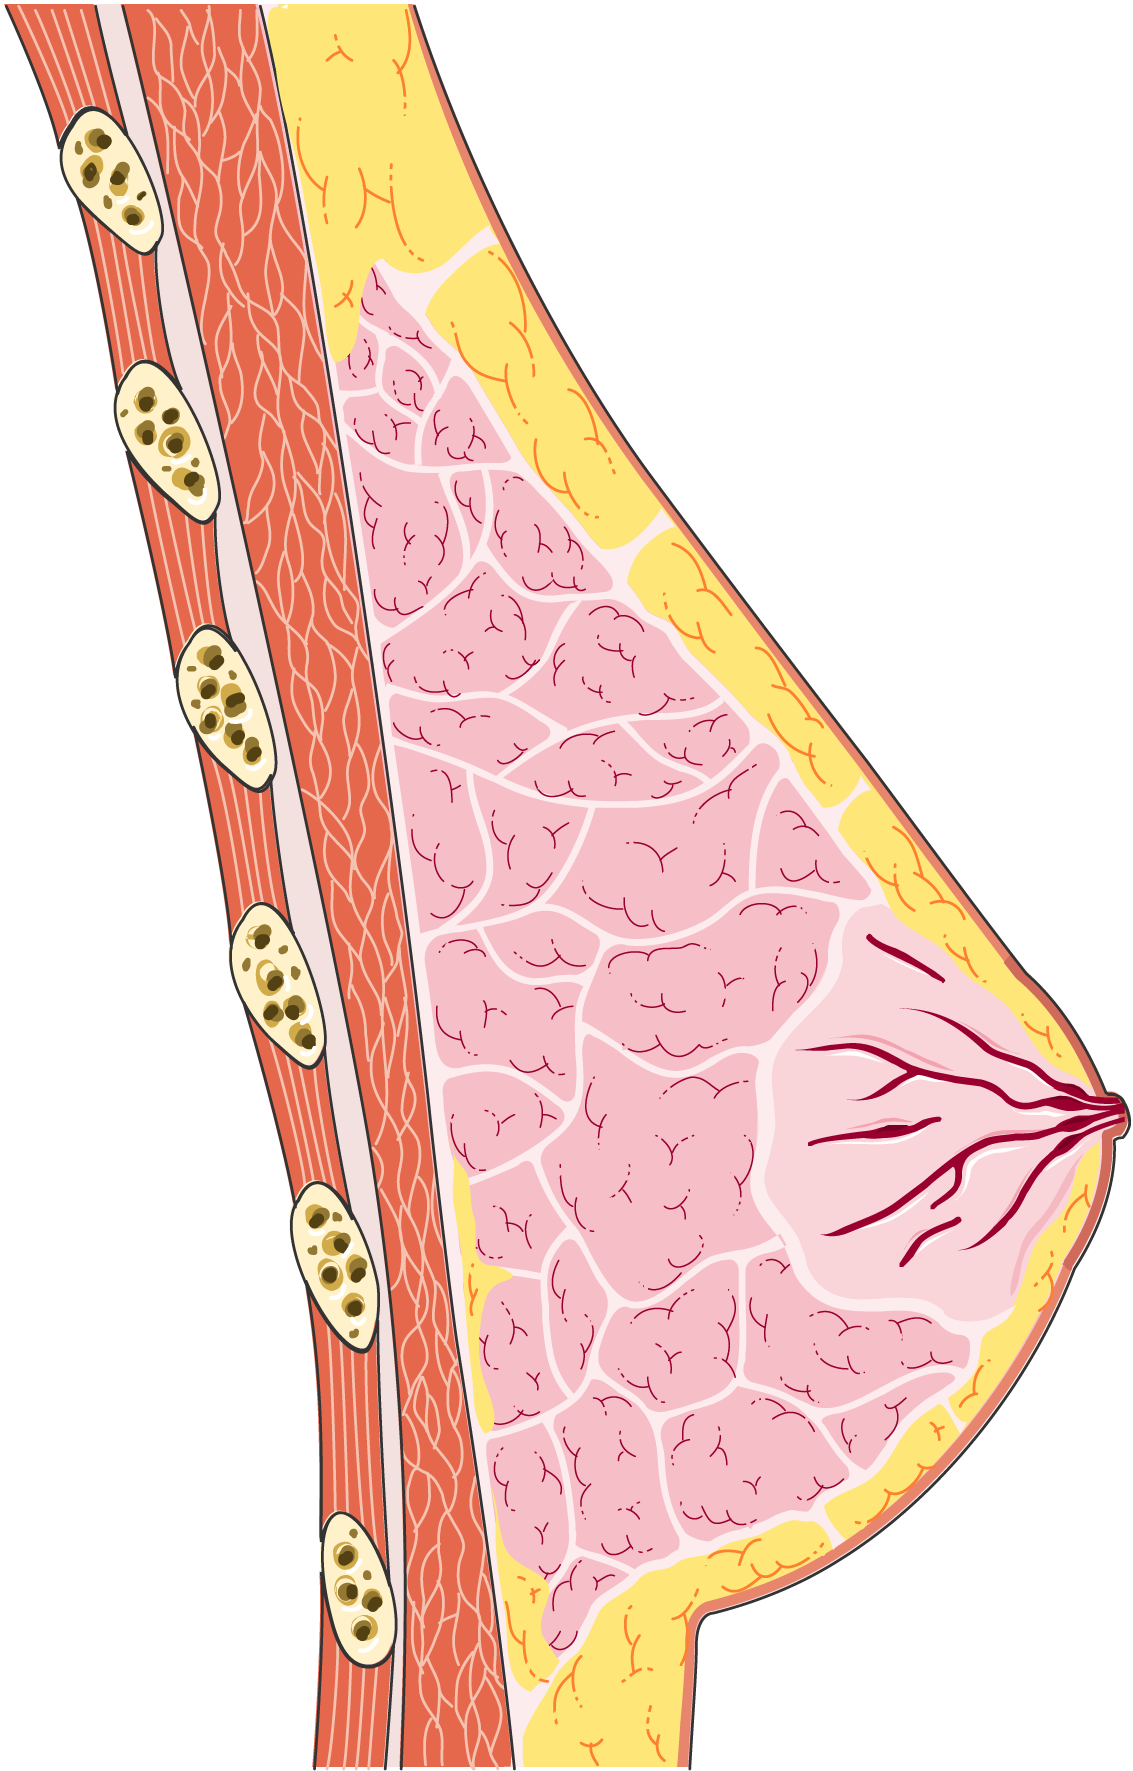 Servier - Drawing Cross-section of the breast - no labels